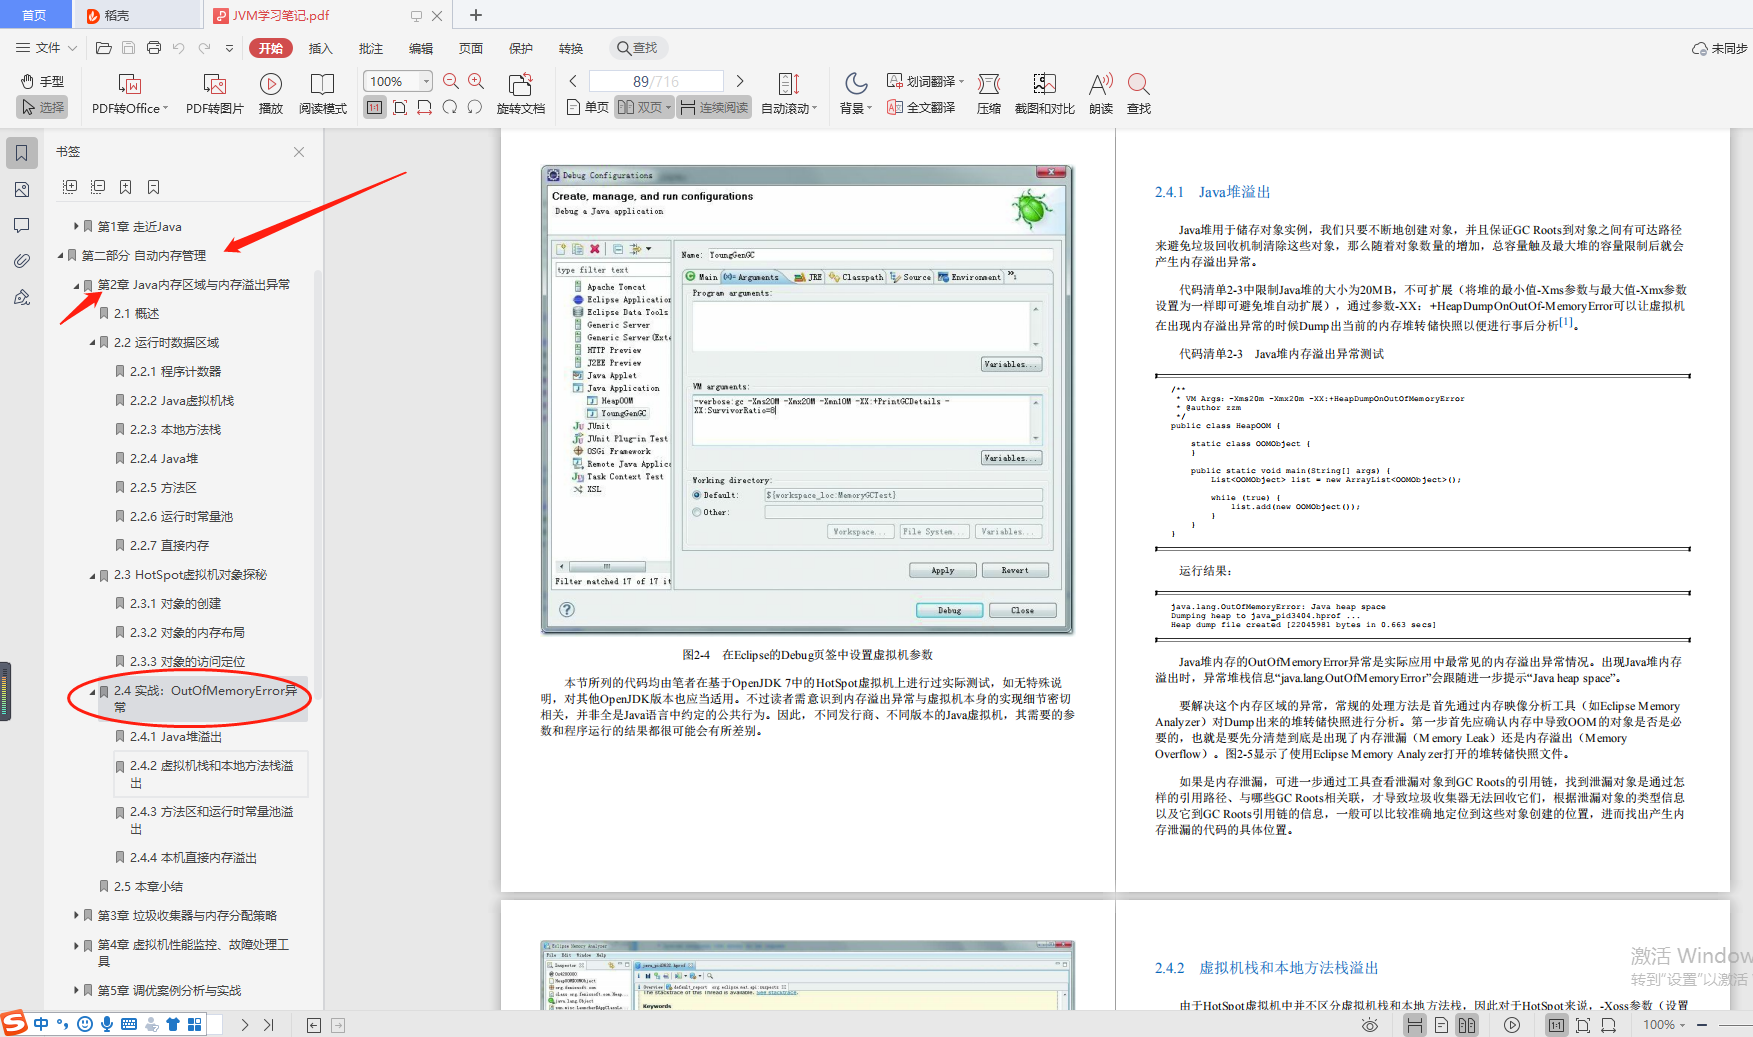 Heavy starting!  Tencent’s latest "JVM study notes" the night before, I love it after reading it